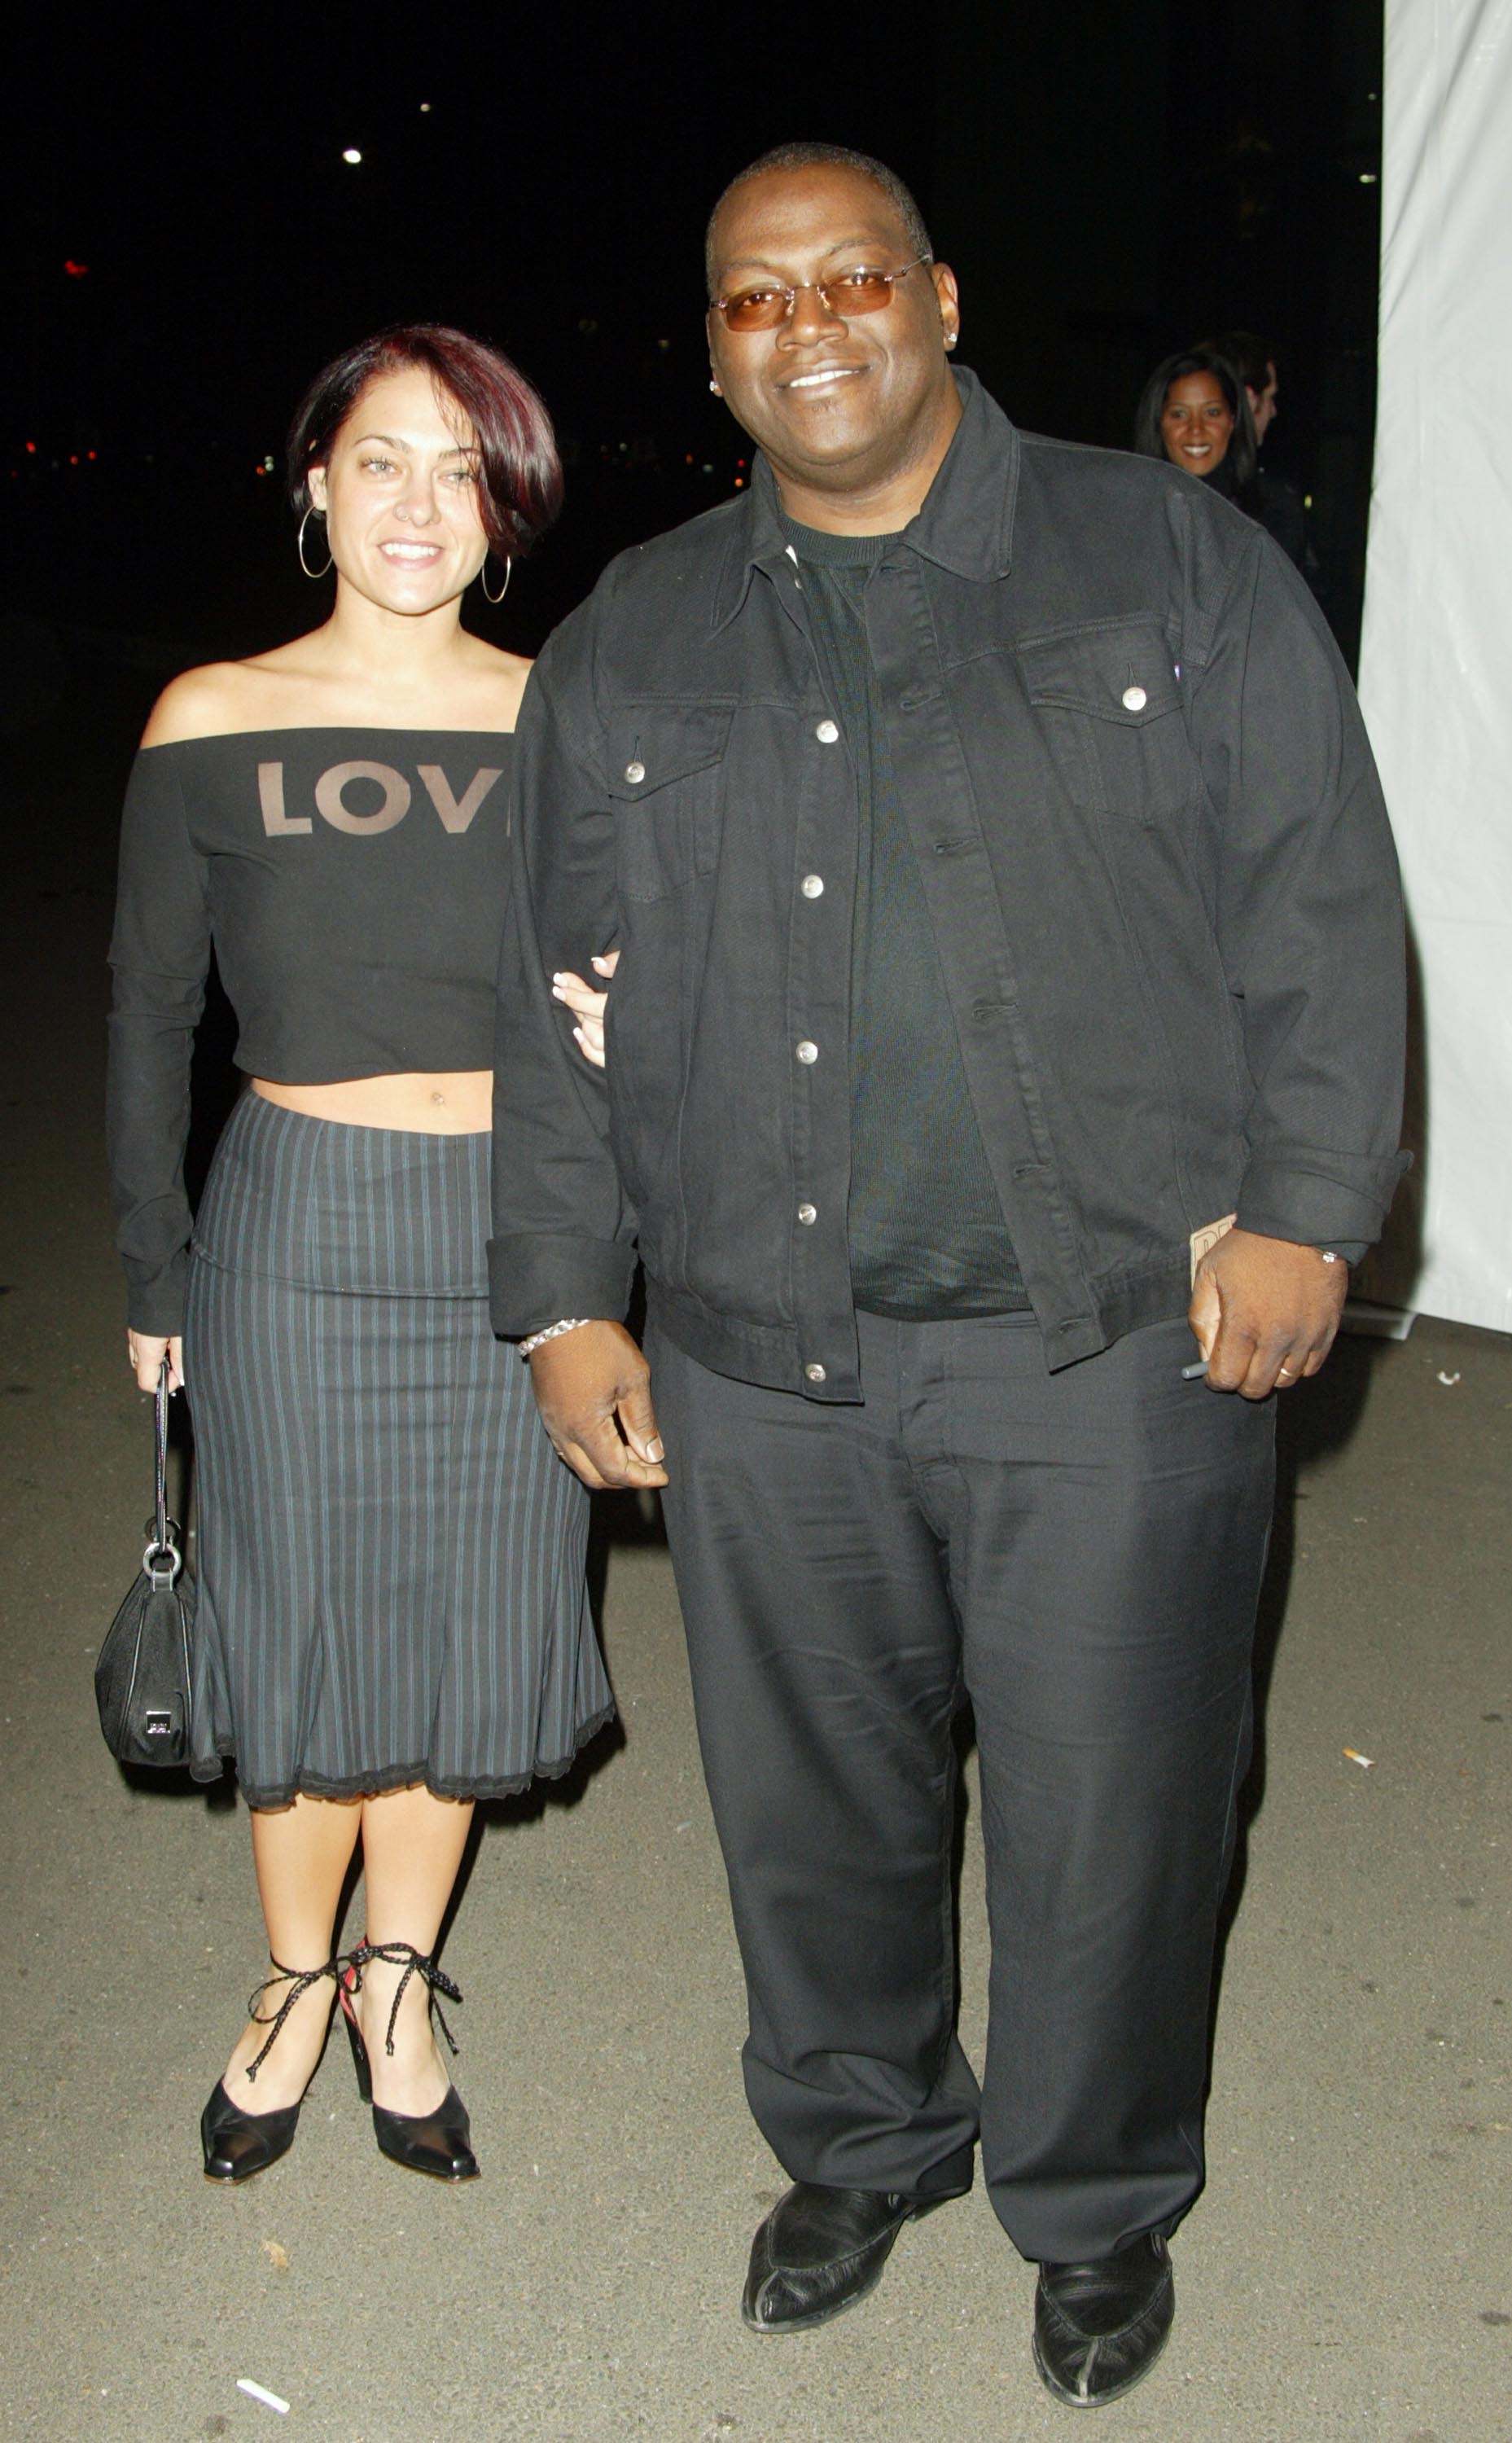 Randy Jackson and Erika Riker arriving at the Livin' Large celebration at The Lounge at Astra Pacific Design Centre in Hollywood on February 13, 2003 in Hollywood, California. | Source: Getty Images